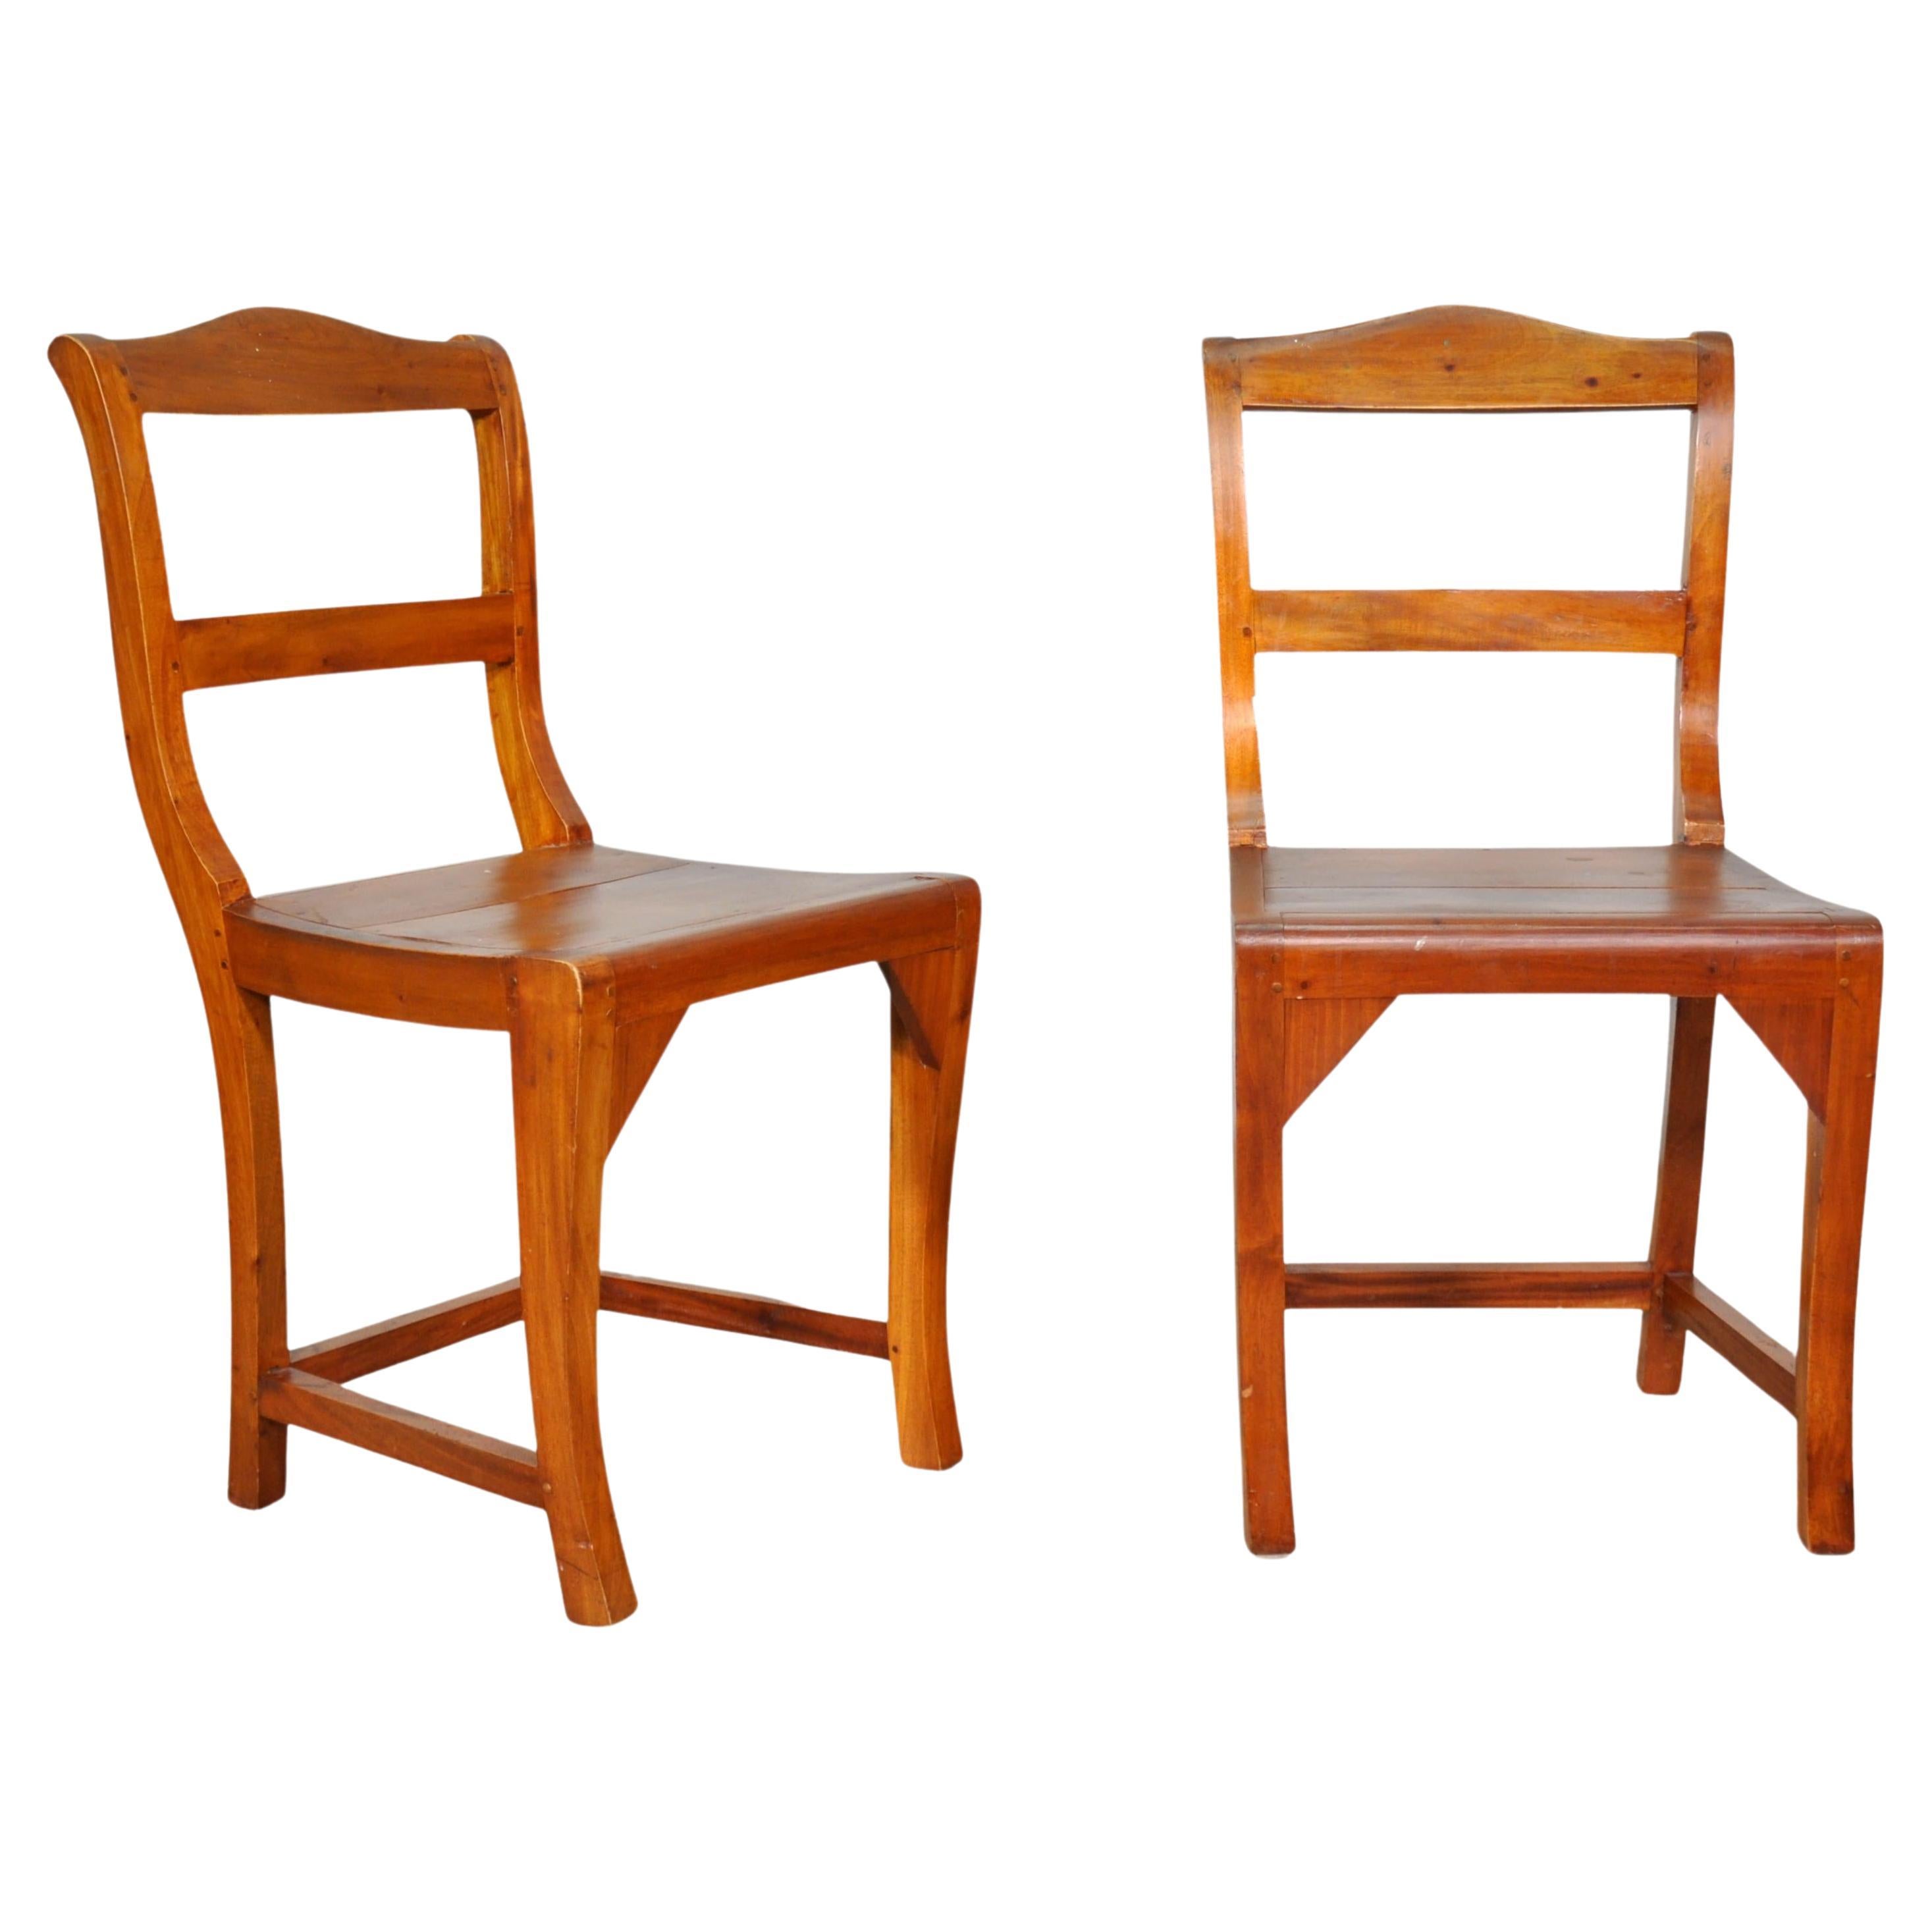 French Country Rustic Side Chairs - a Pair For Sale